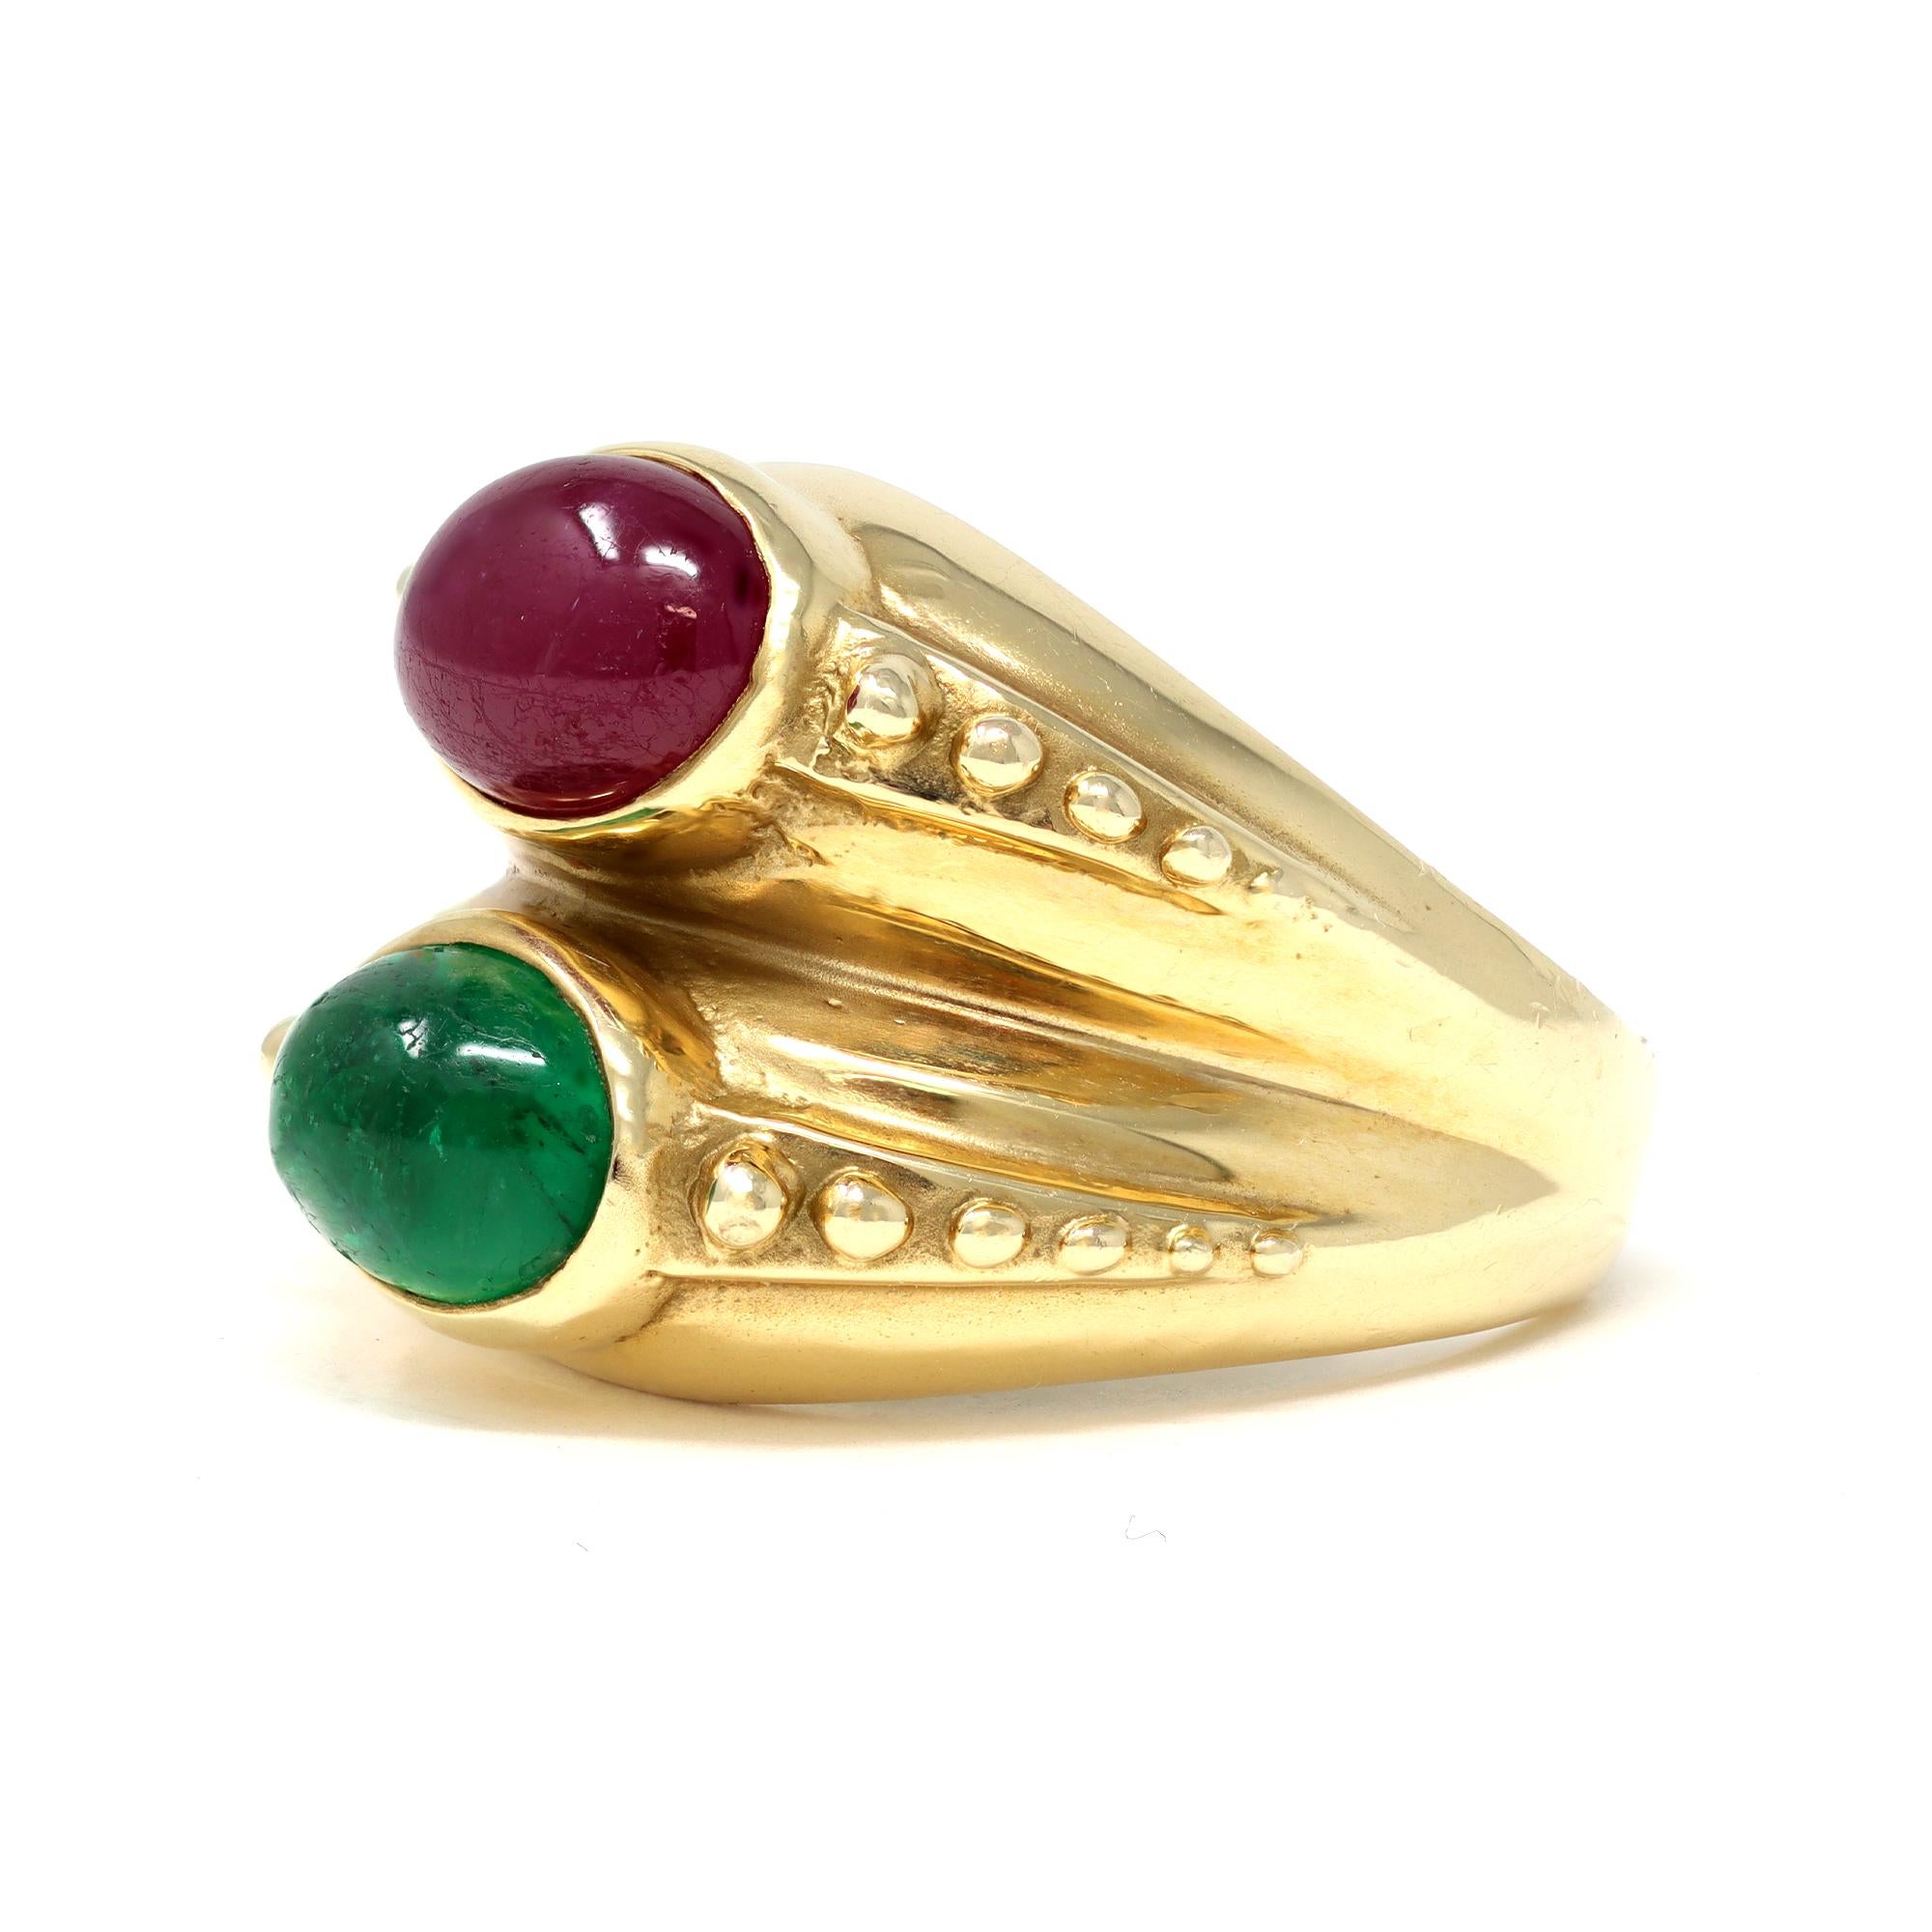 The vintage double stone ring is circa 1960. It is styled in 18 karat yellow gold. The ring presents 2 matched in size oval cabochon ruby and emerald. The emerald has an estimated weight of 2.50 carats with a minor inclusion to the surface. The deep